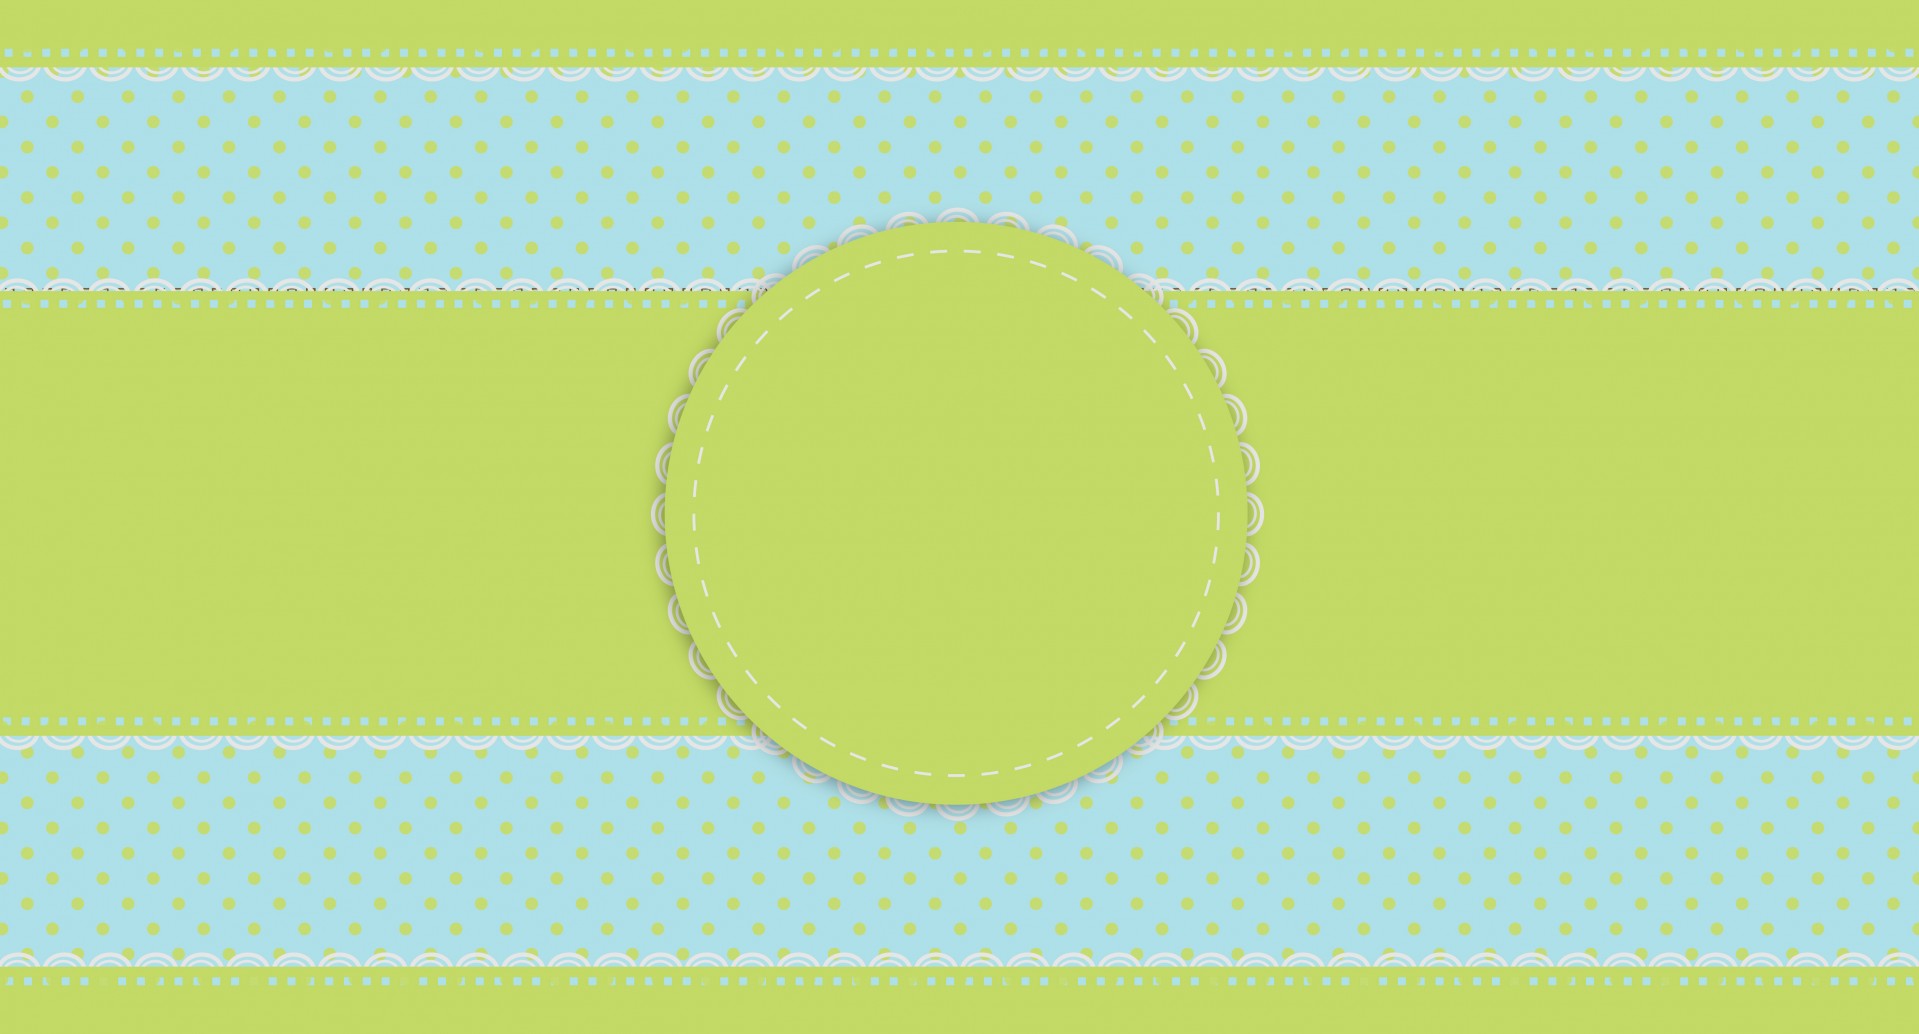 Fancy lace polka dots border trim in blue and green spots, dots